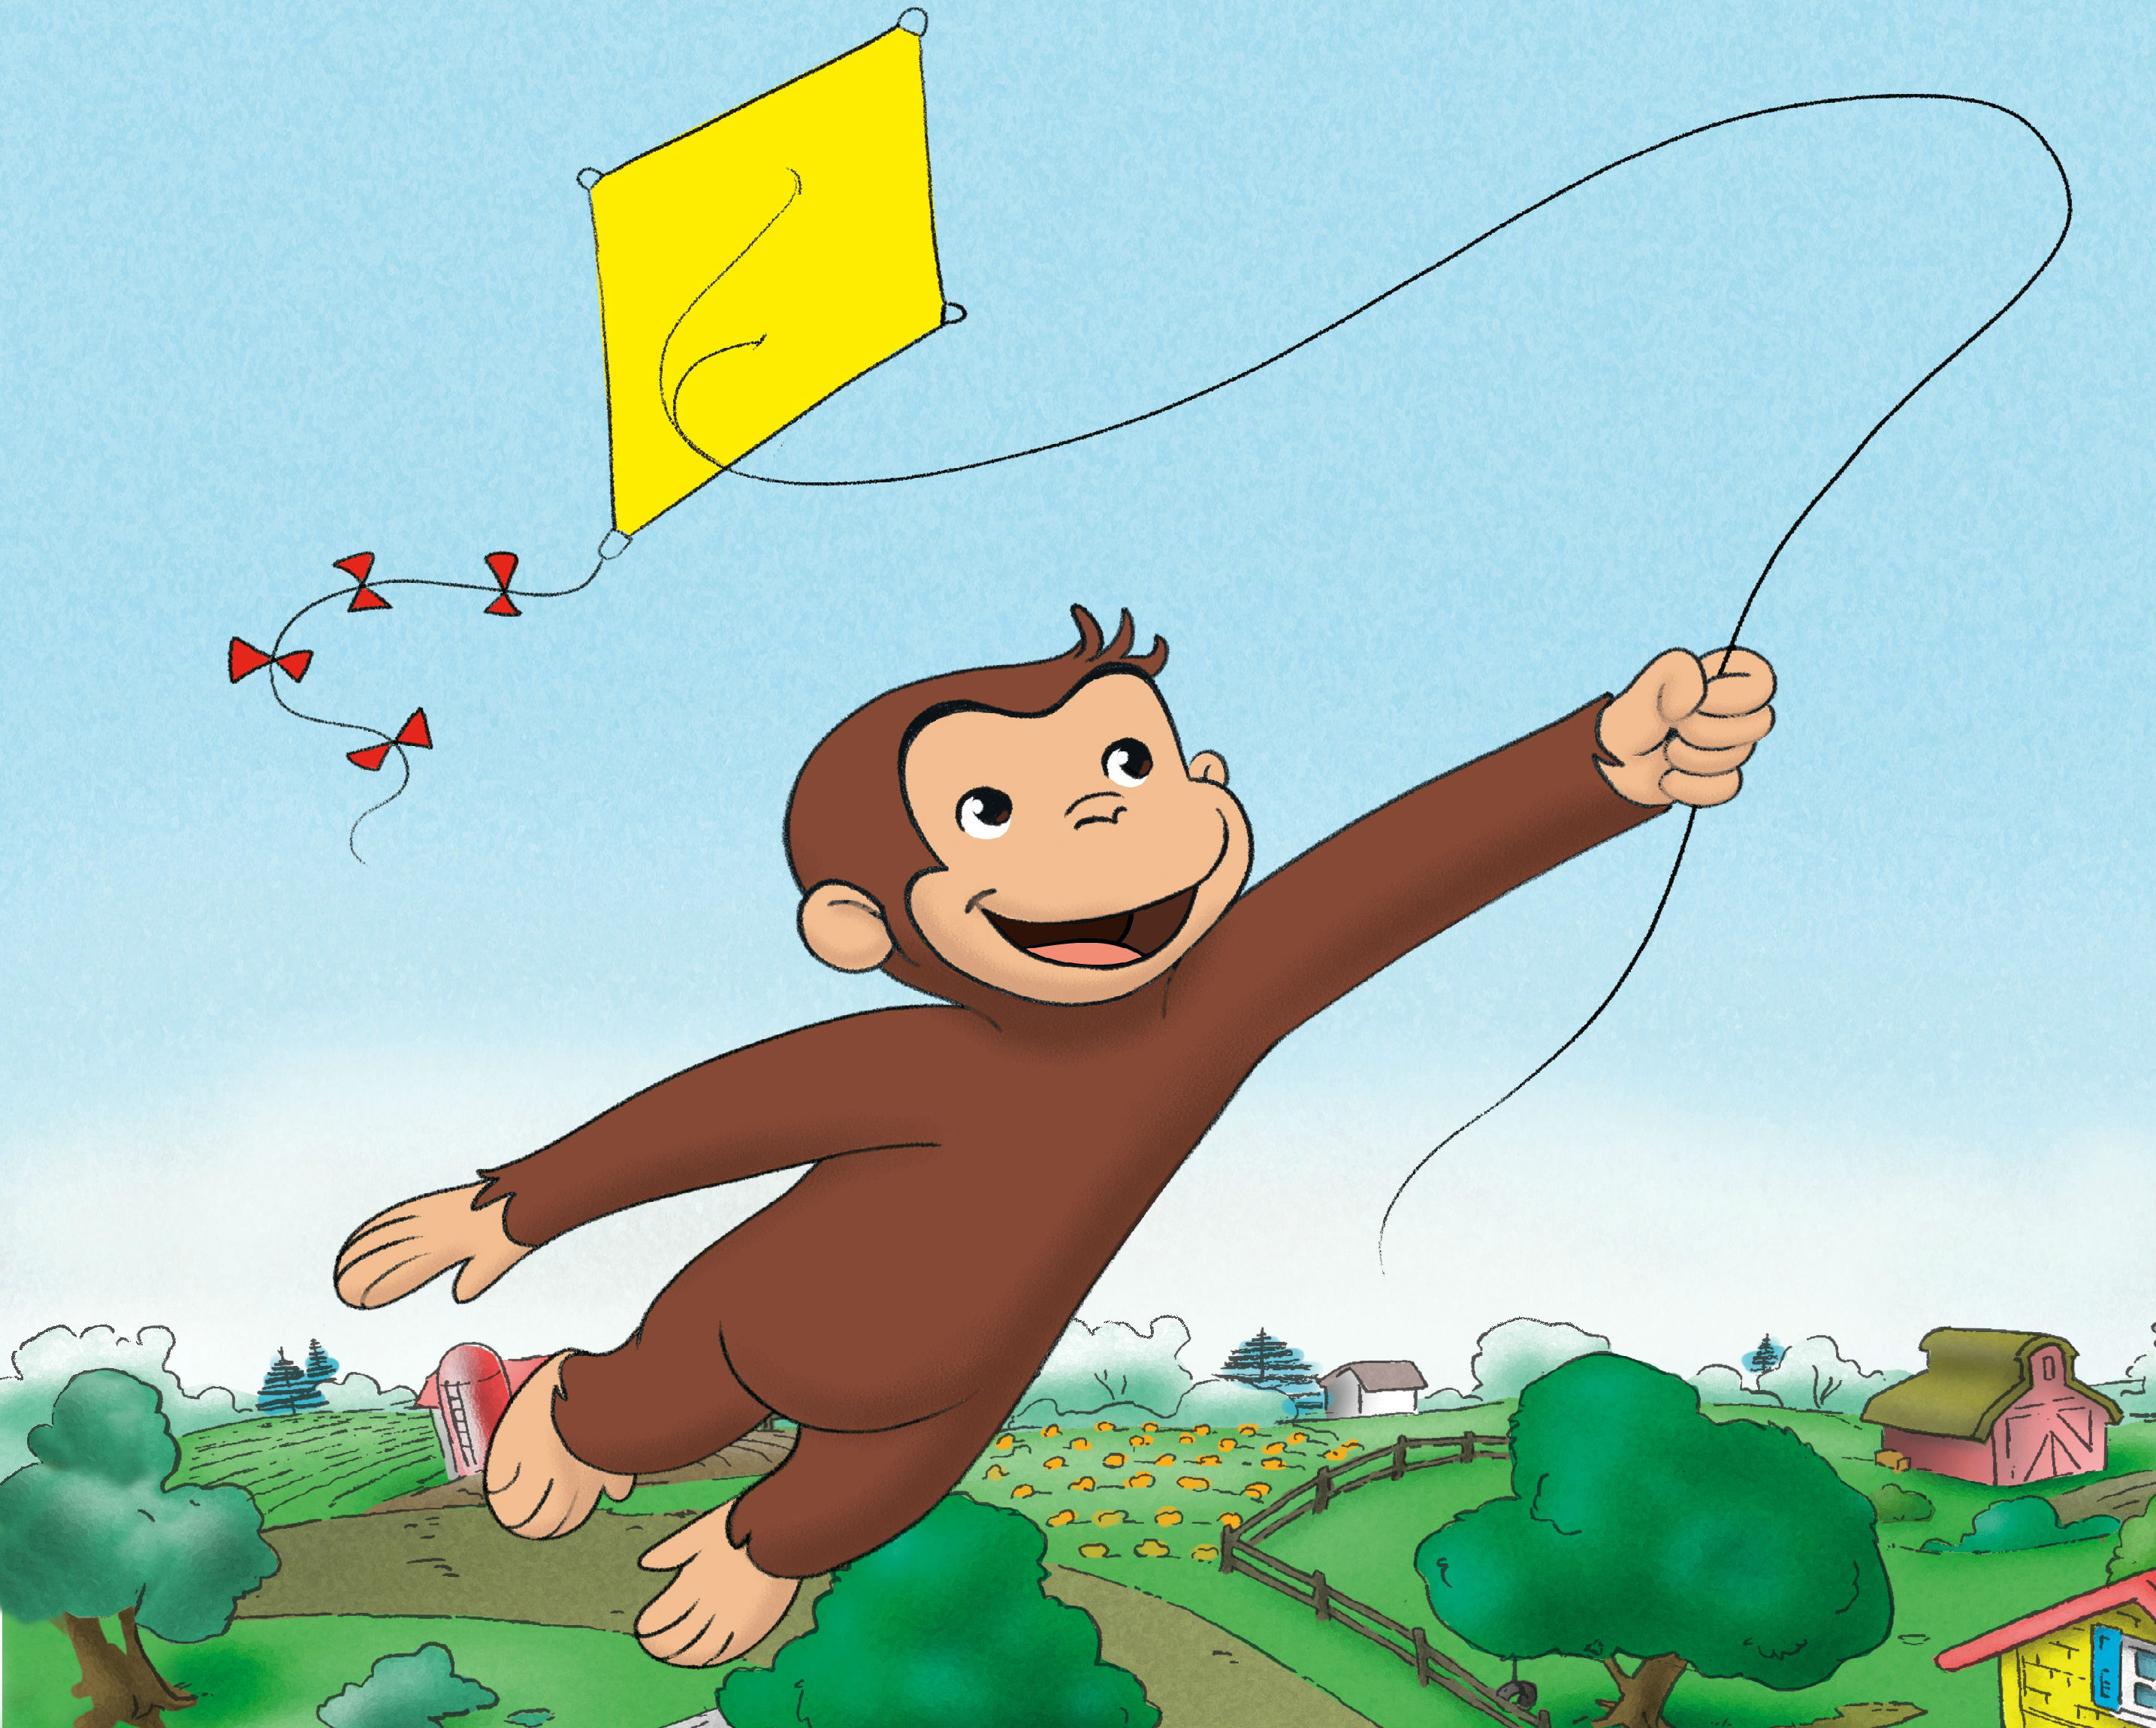 CURIOUS GEORGE fw wallpaper 2870x2300 185530 WallpaperUP 2870x2300